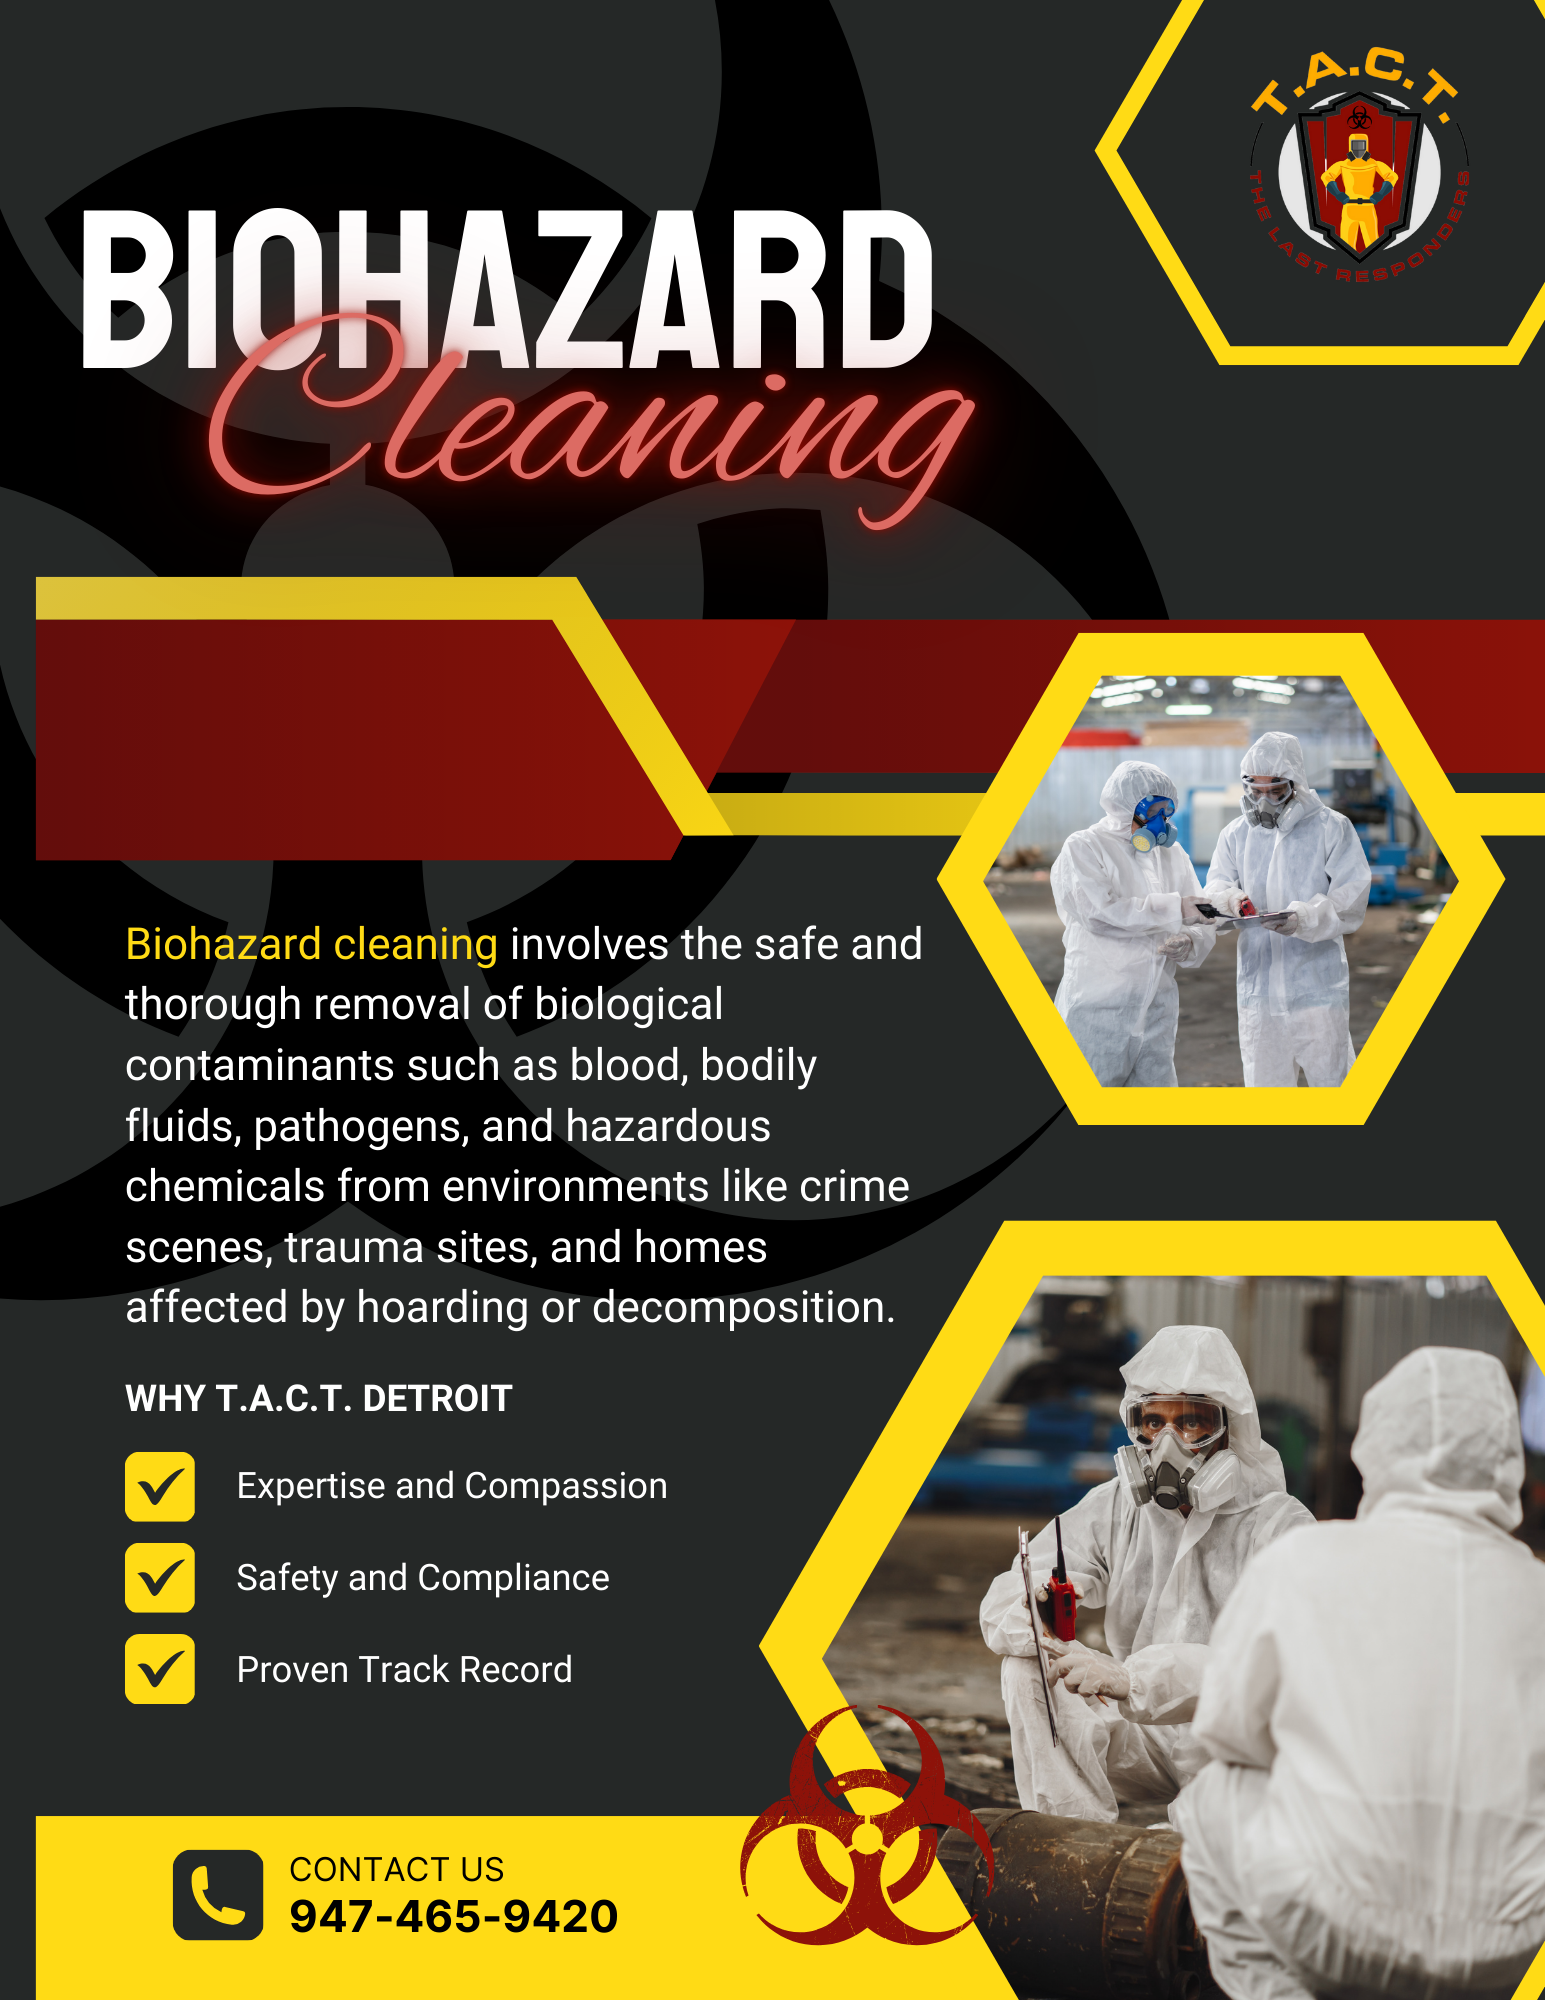 Contact T.A.C.T. Detroit for Reliable Biohazard Cleaning Services